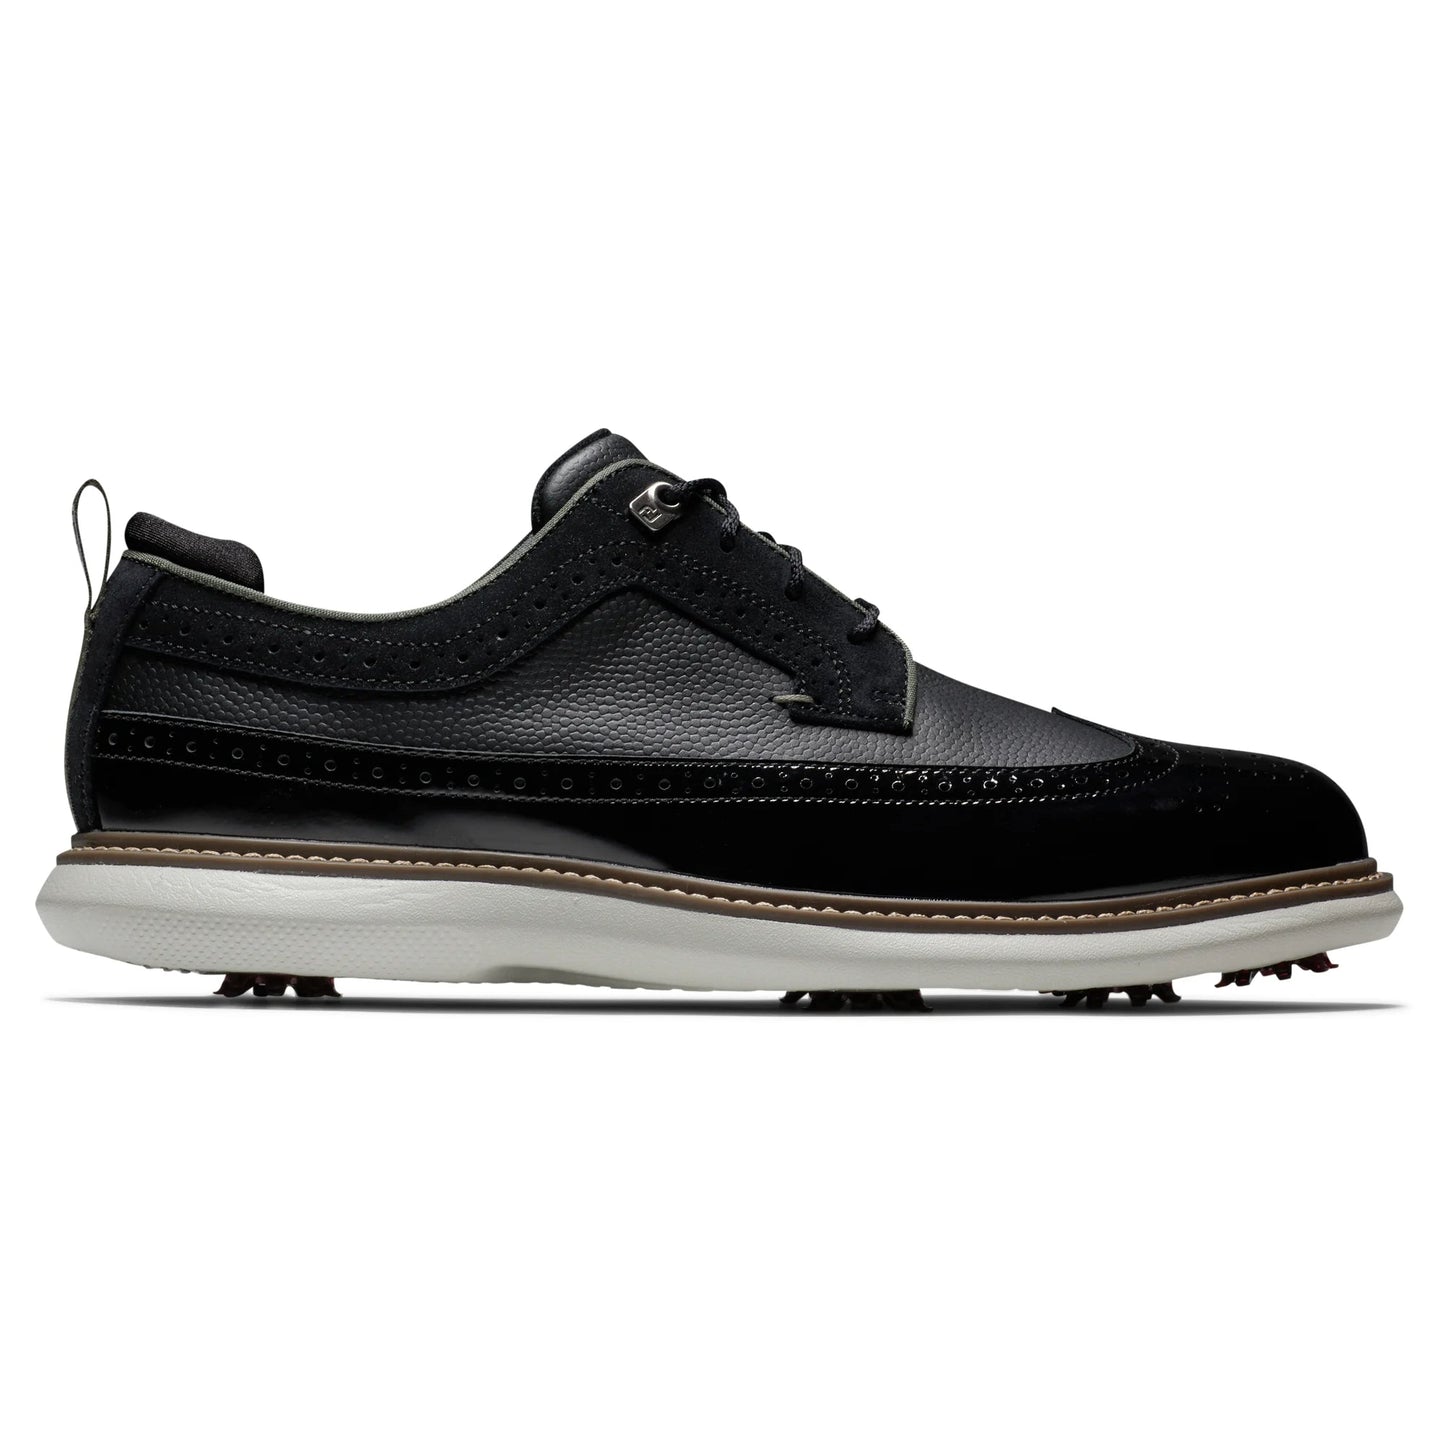 FootJoy X Todd Snyder LE Tradition Golf Shoes 57931